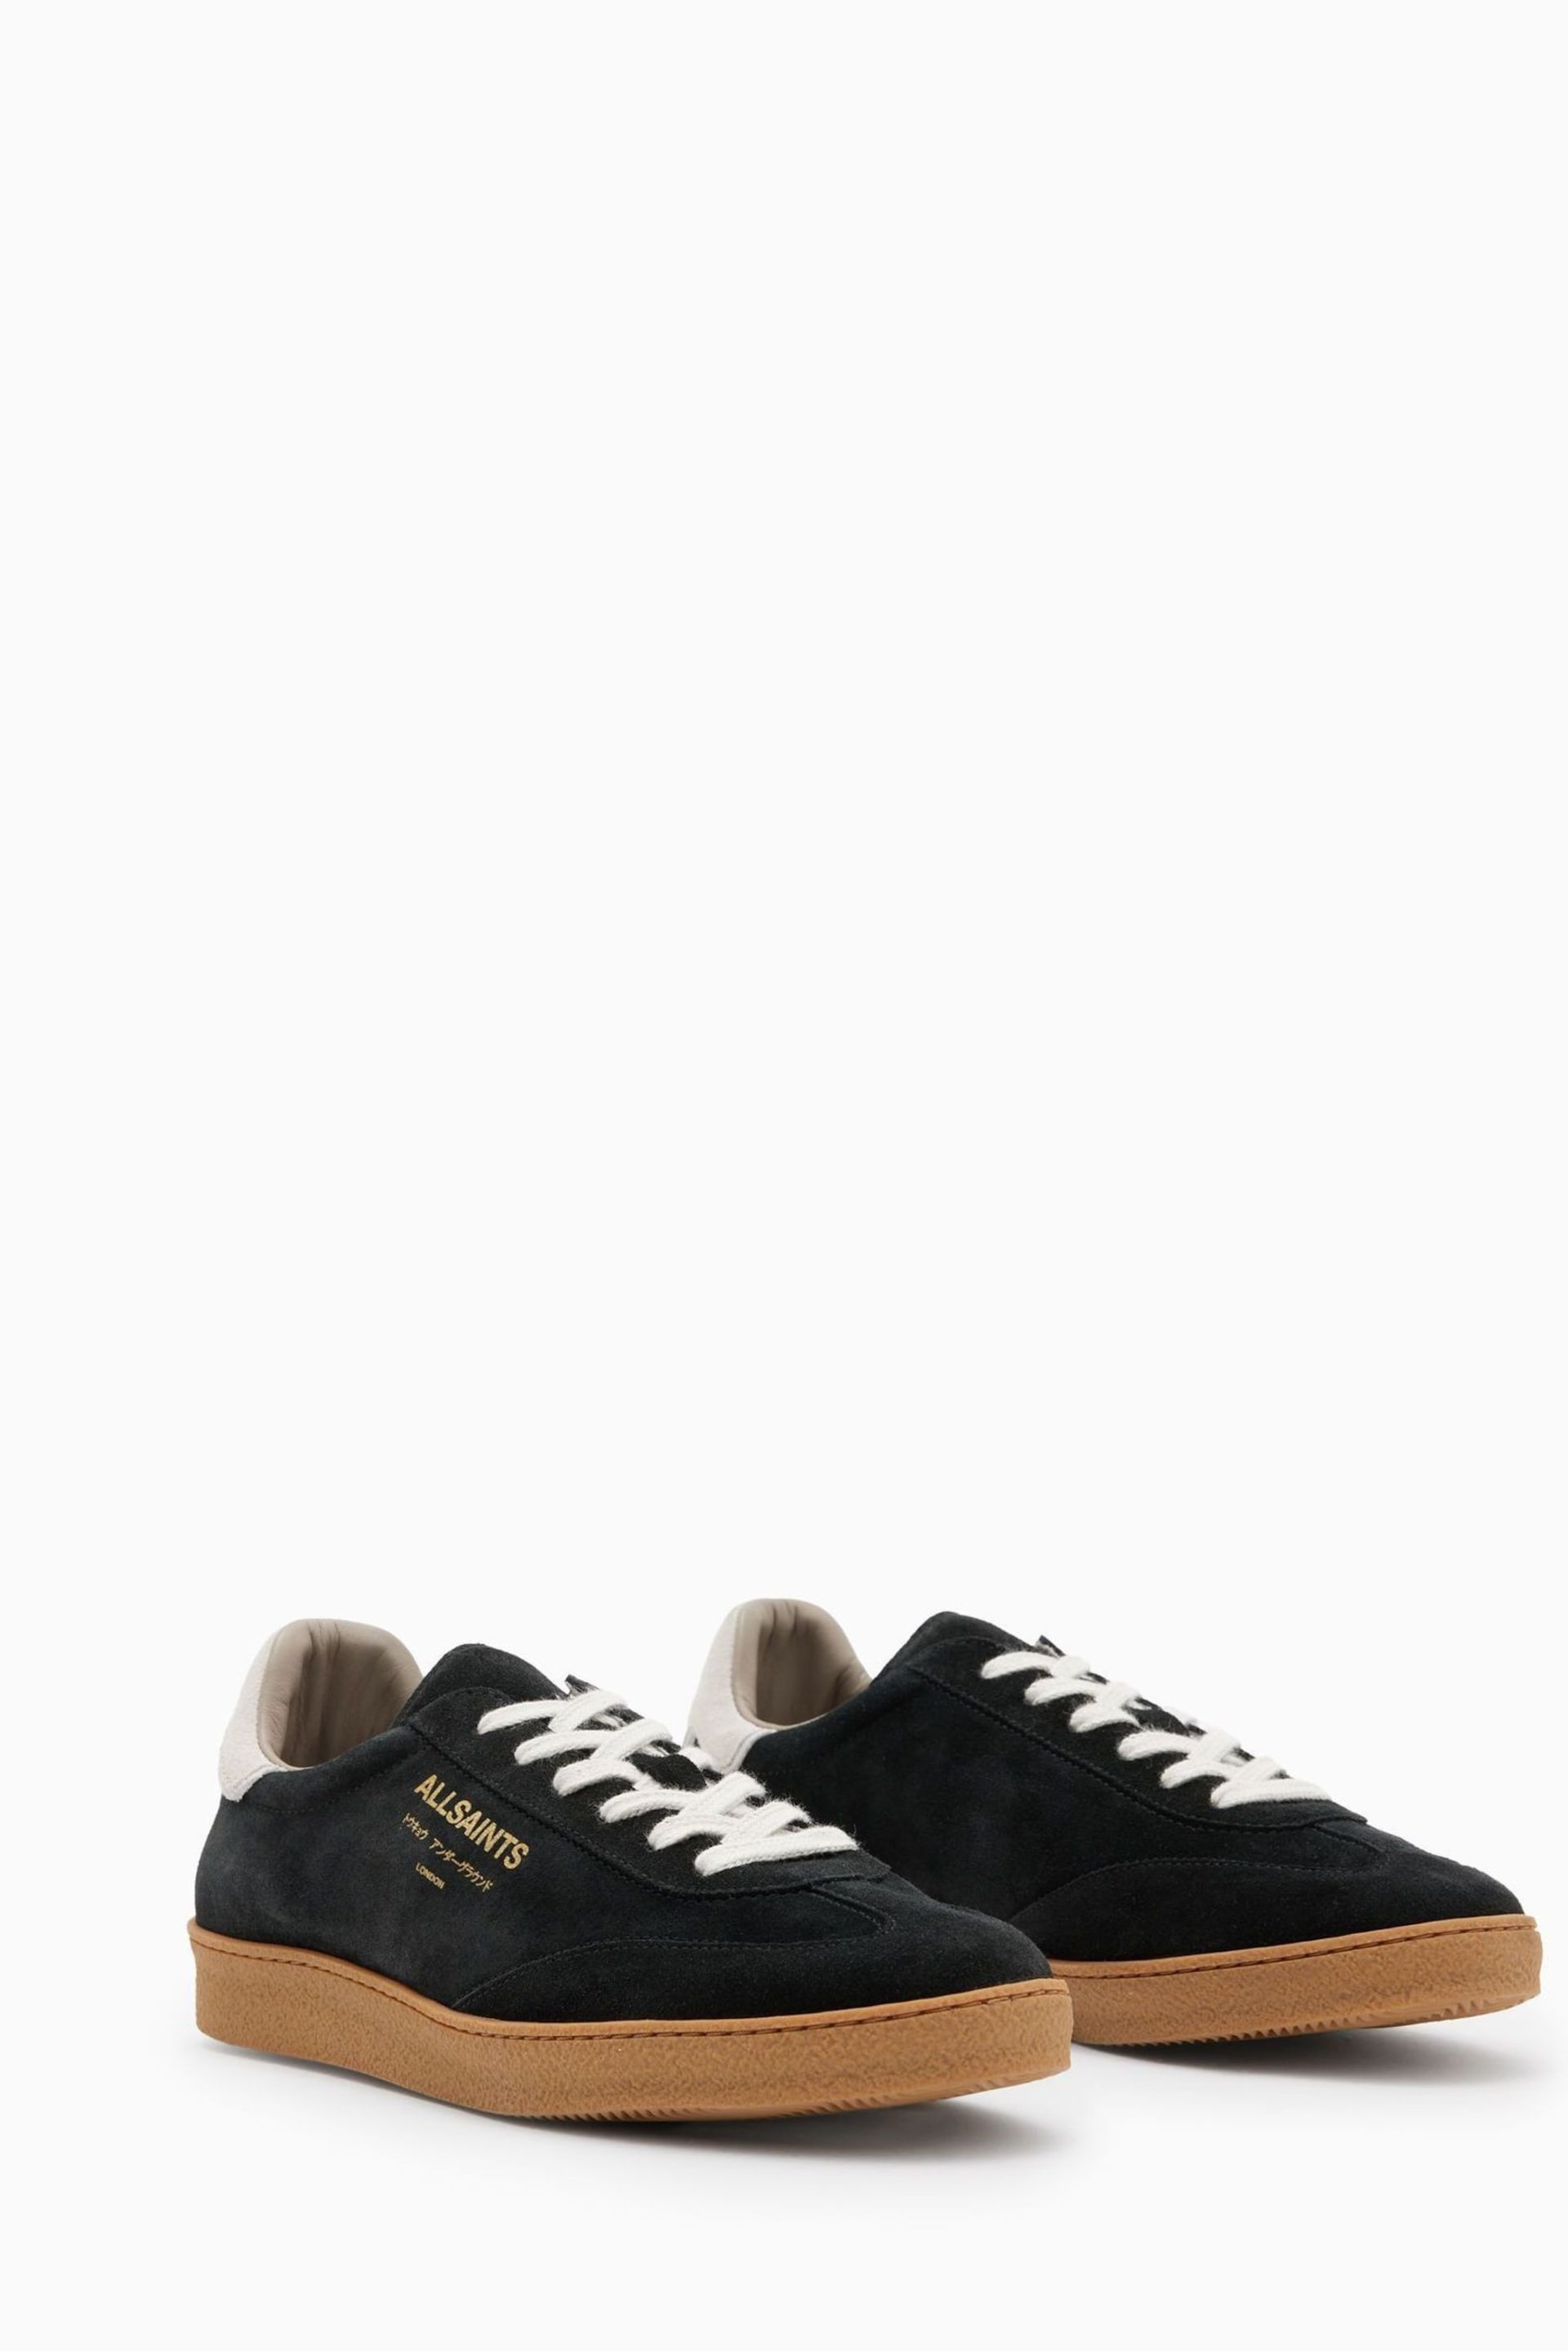 AllSaints Black Suede Thelma Sneakers - Image 2 of 5